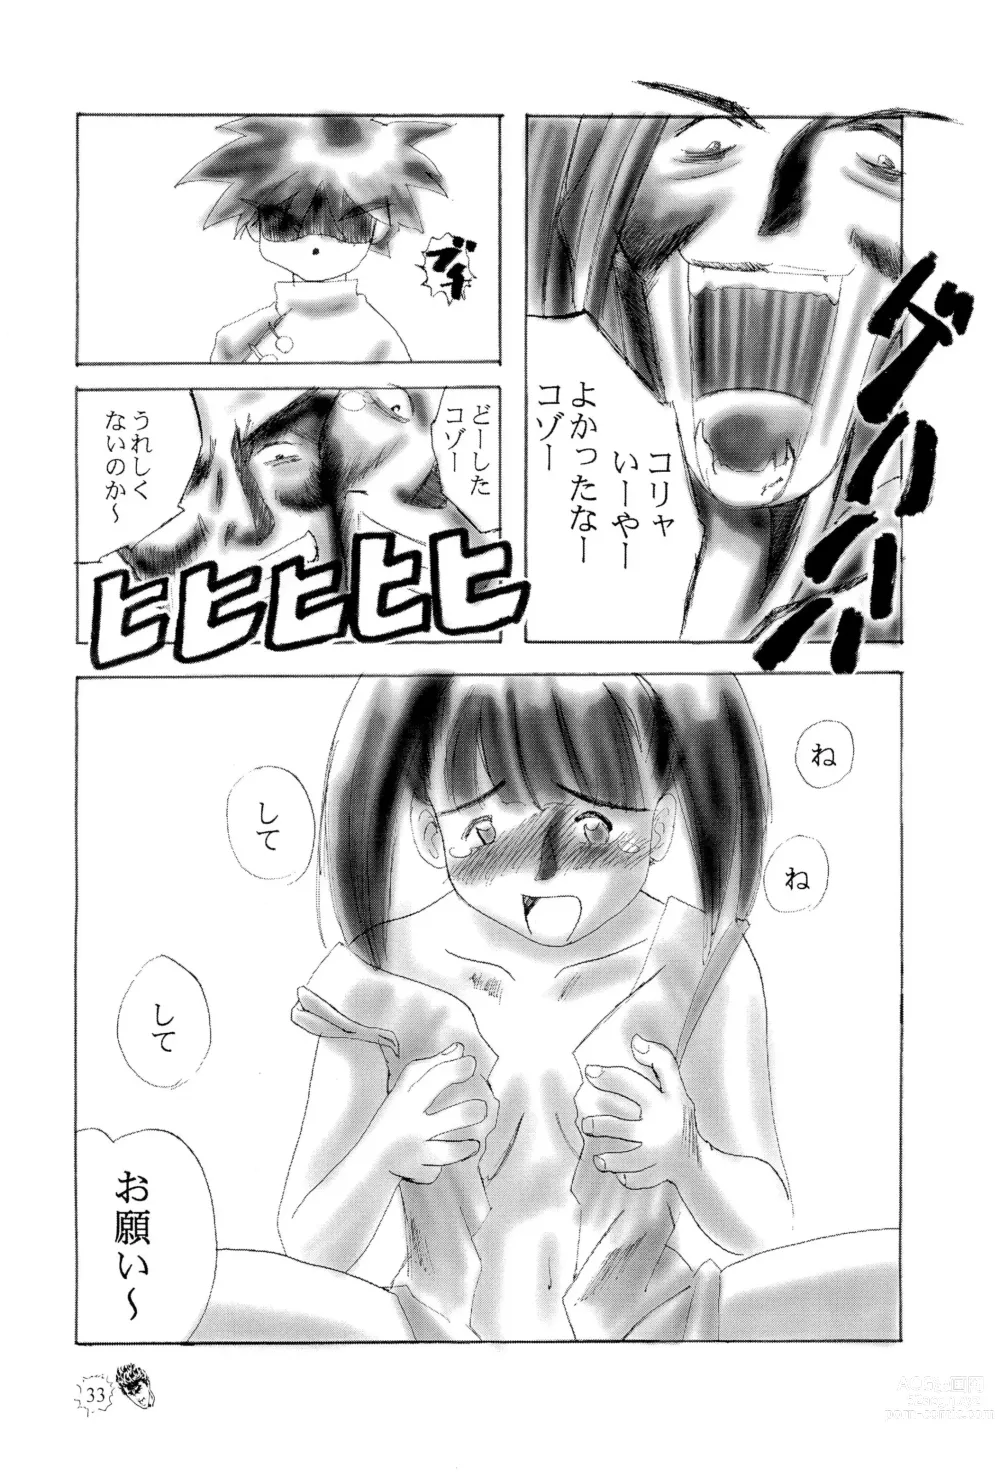 Page 33 of doujinshi CHIBICKERS 4